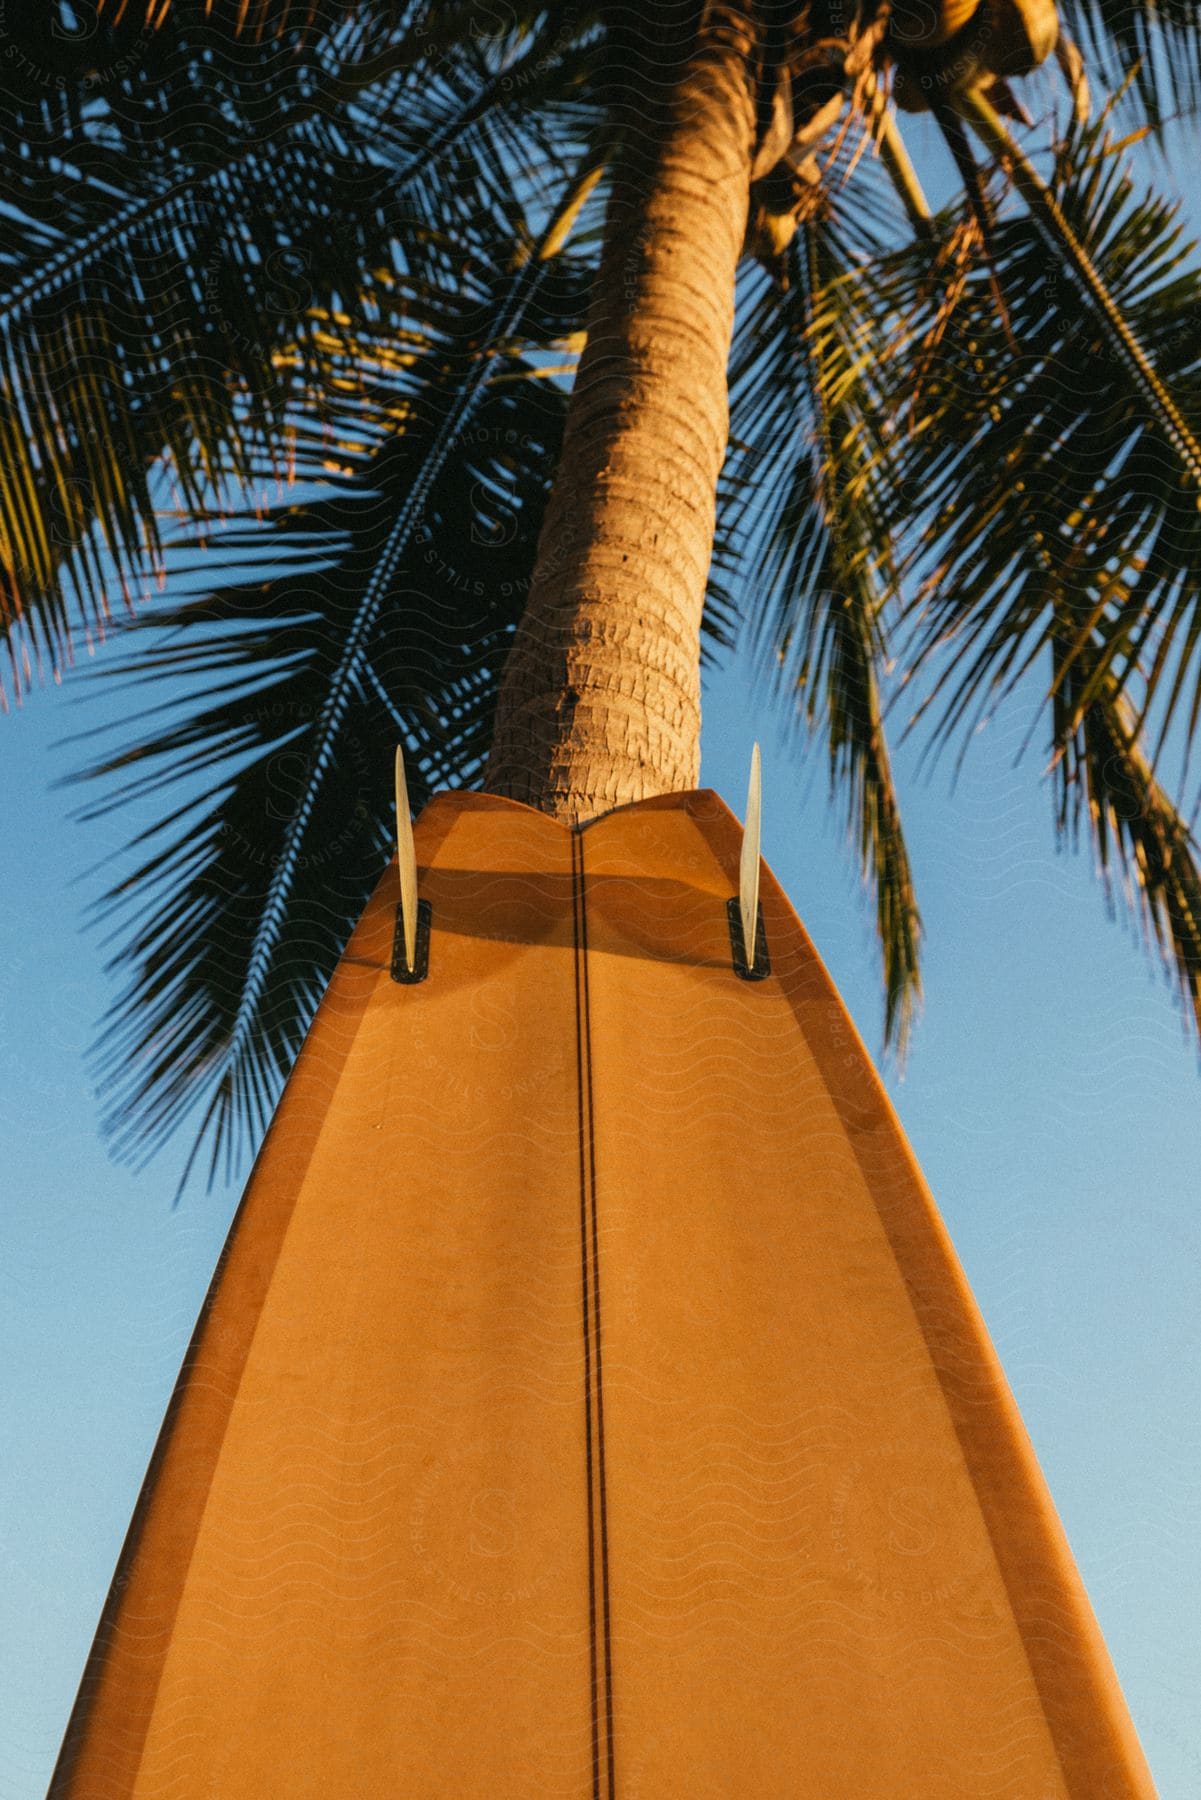 a surfboard is propped up against a palm tree